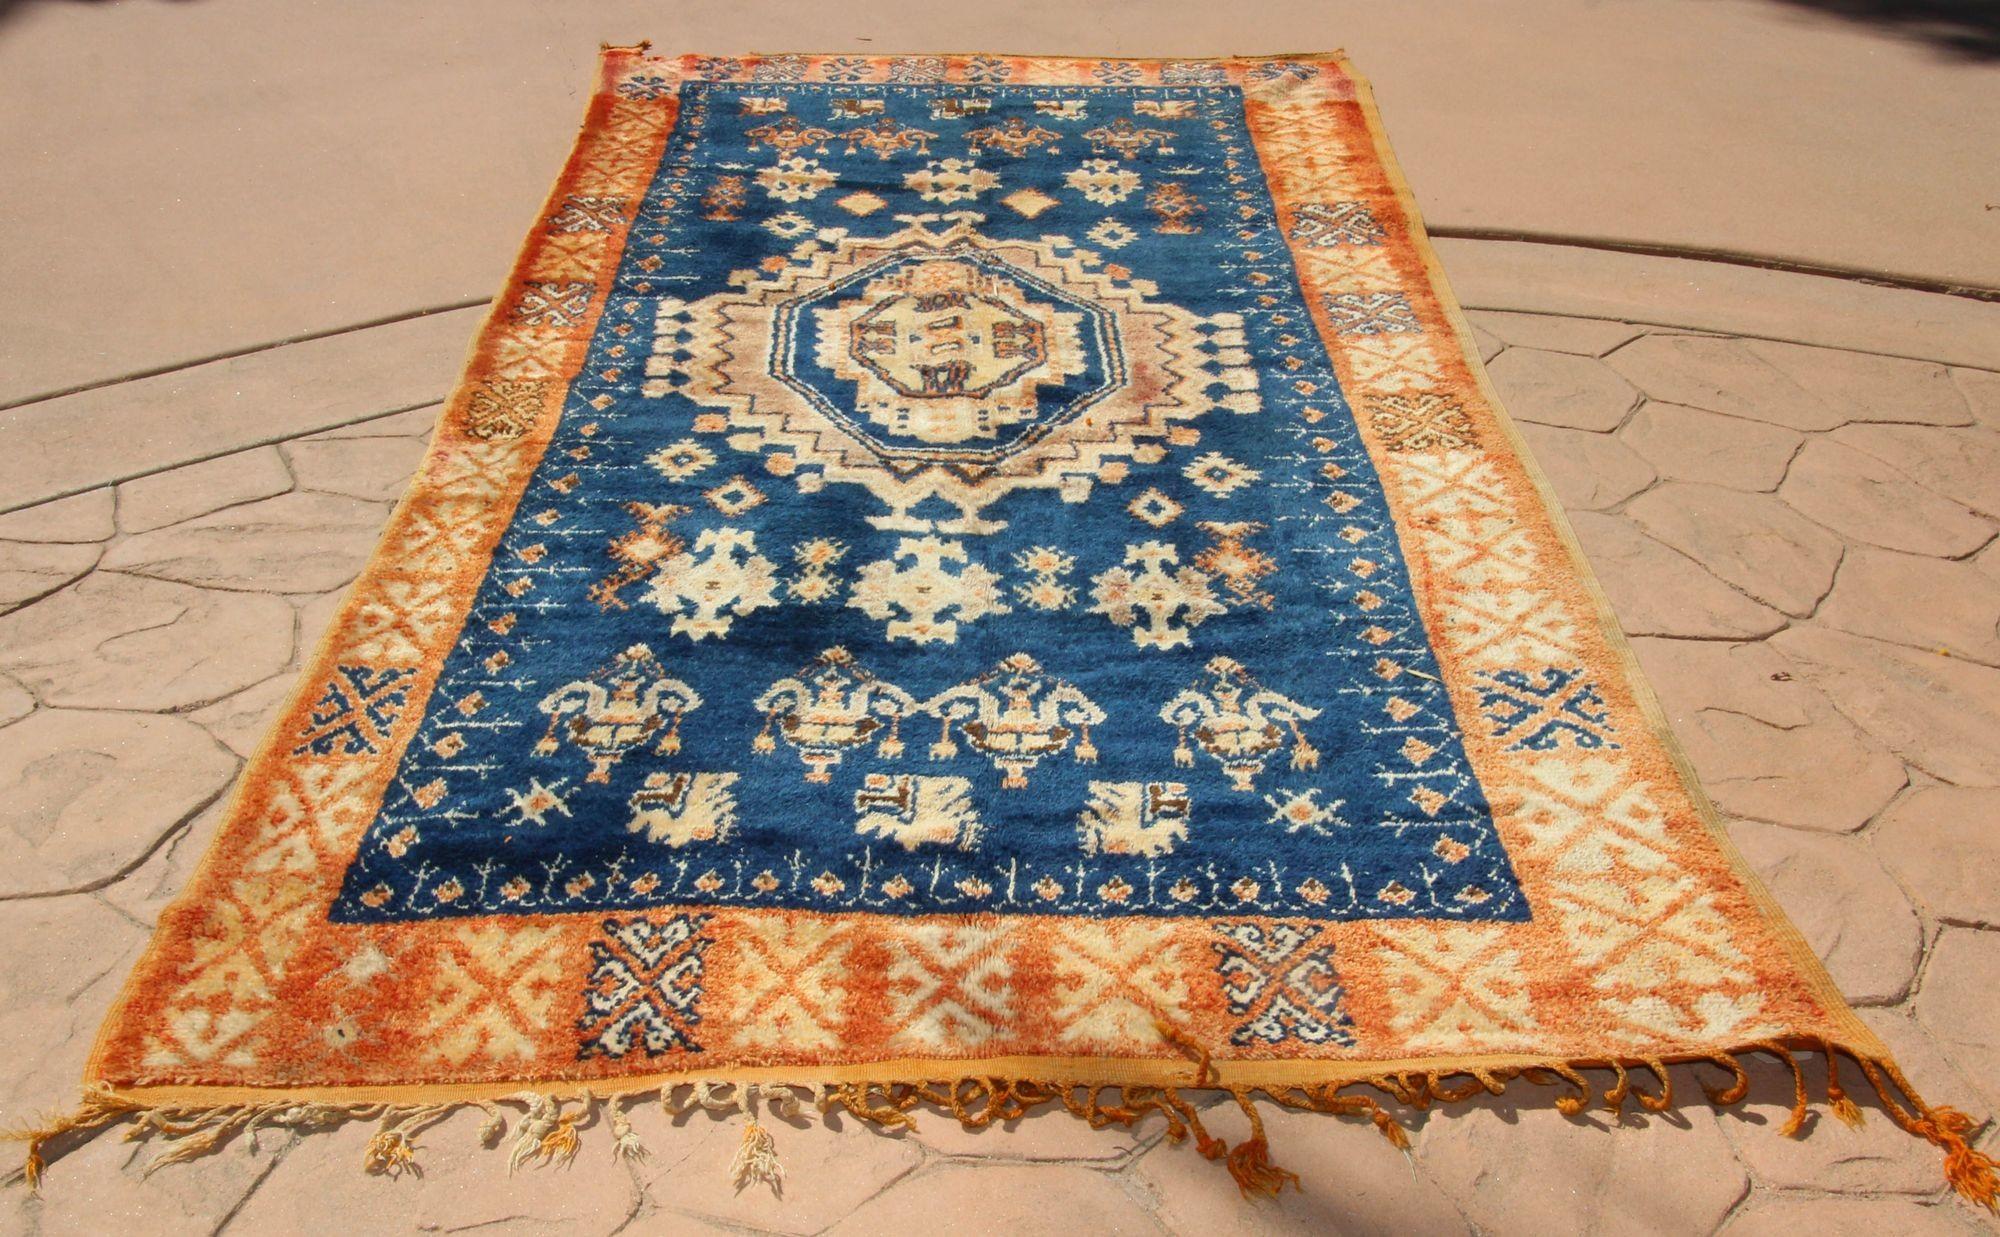 1960s Vintage Moroccan Tribal African Rug in Indigo and Burnt Orange cors.Authentic 1960s vintage Moroccan tribal African rug.For centuries the tribal people of Morocco's Atlas Mountains have passed down the delicate art of rug-weaving. In Northern